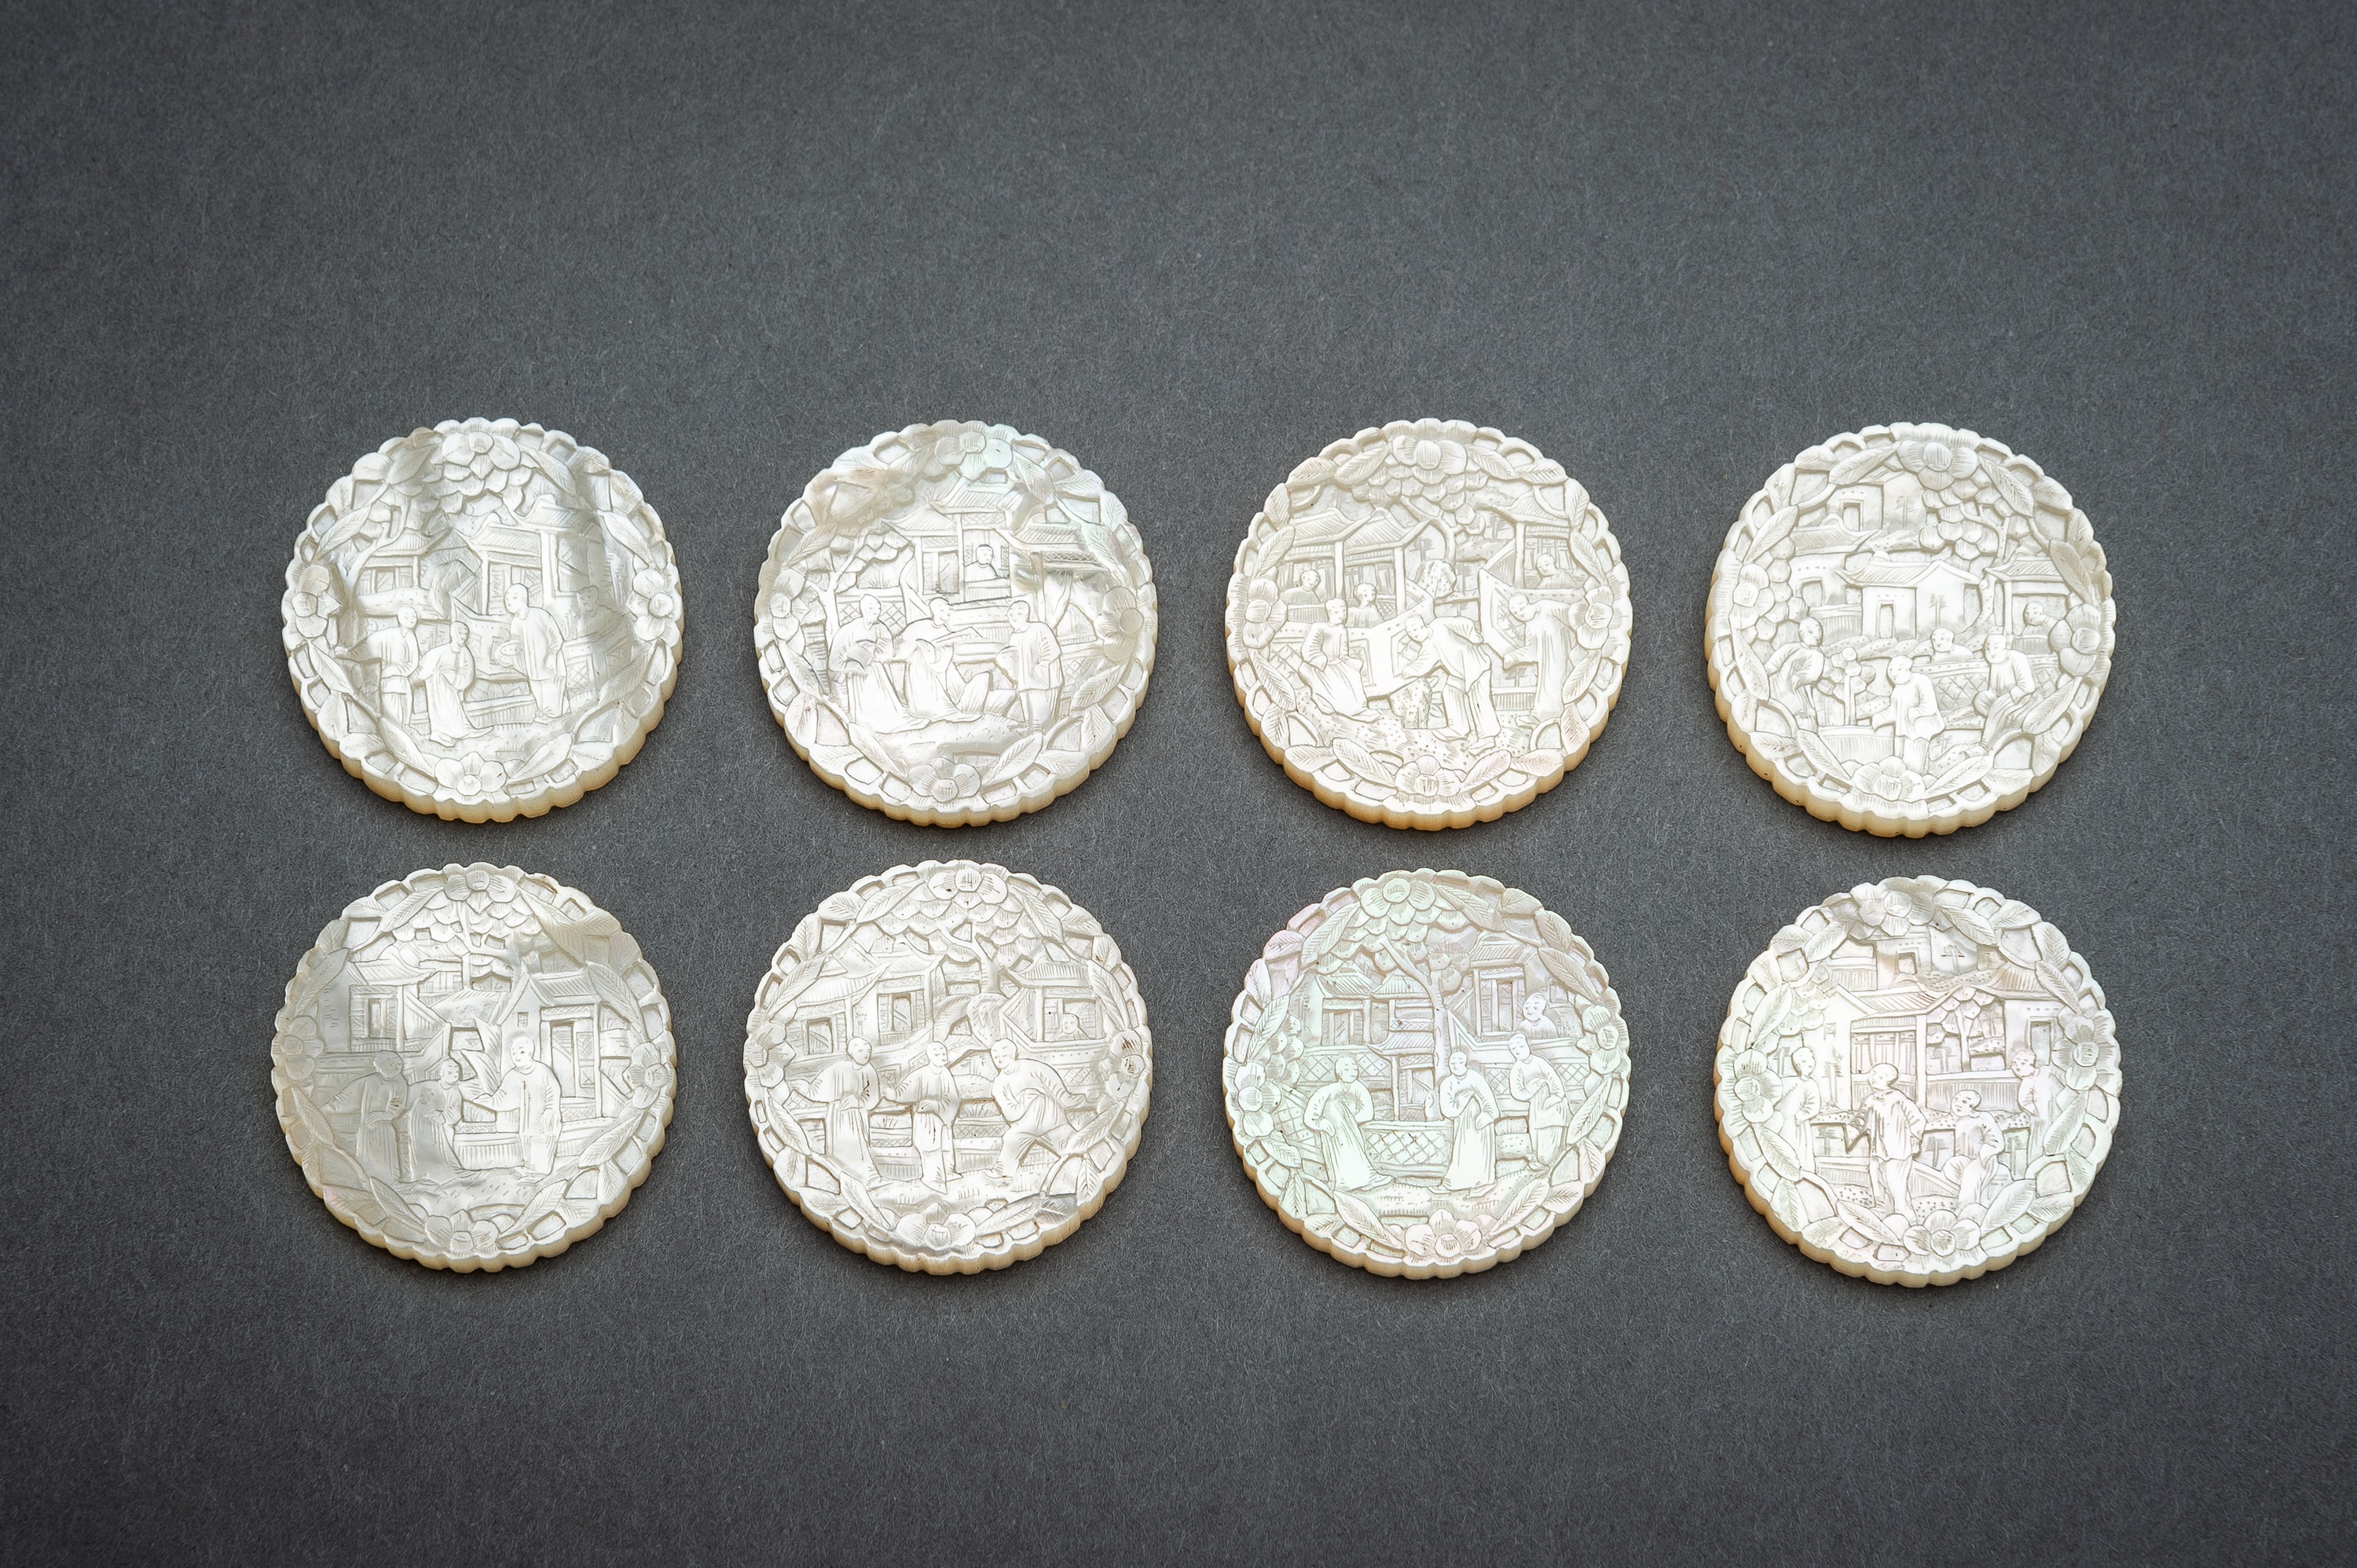 A SET OF 14 MOTHER OF PEARL GAMING TOKENS - Image 5 of 9